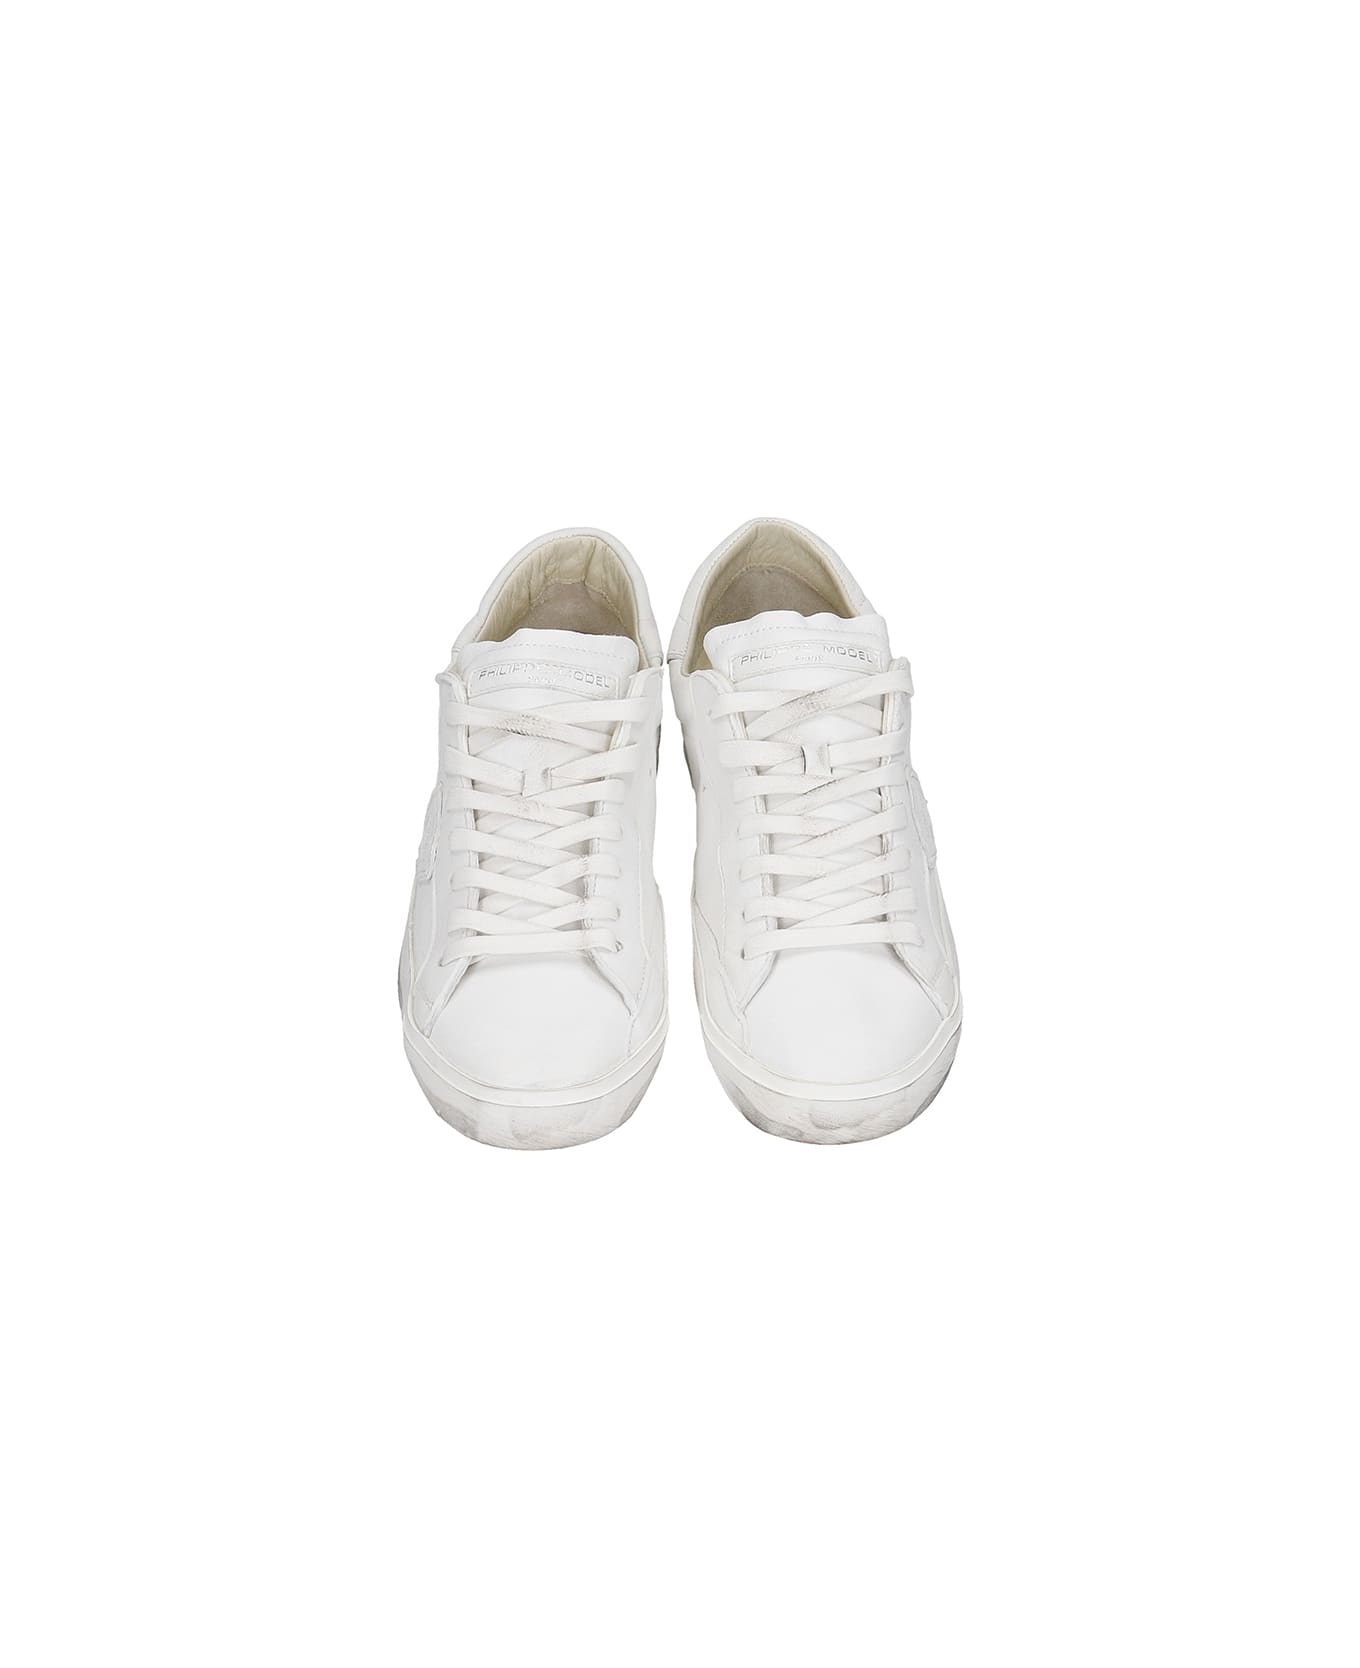 Philippe Model Prsx L Sneakers In White Leather - Basic Blanc スニーカー